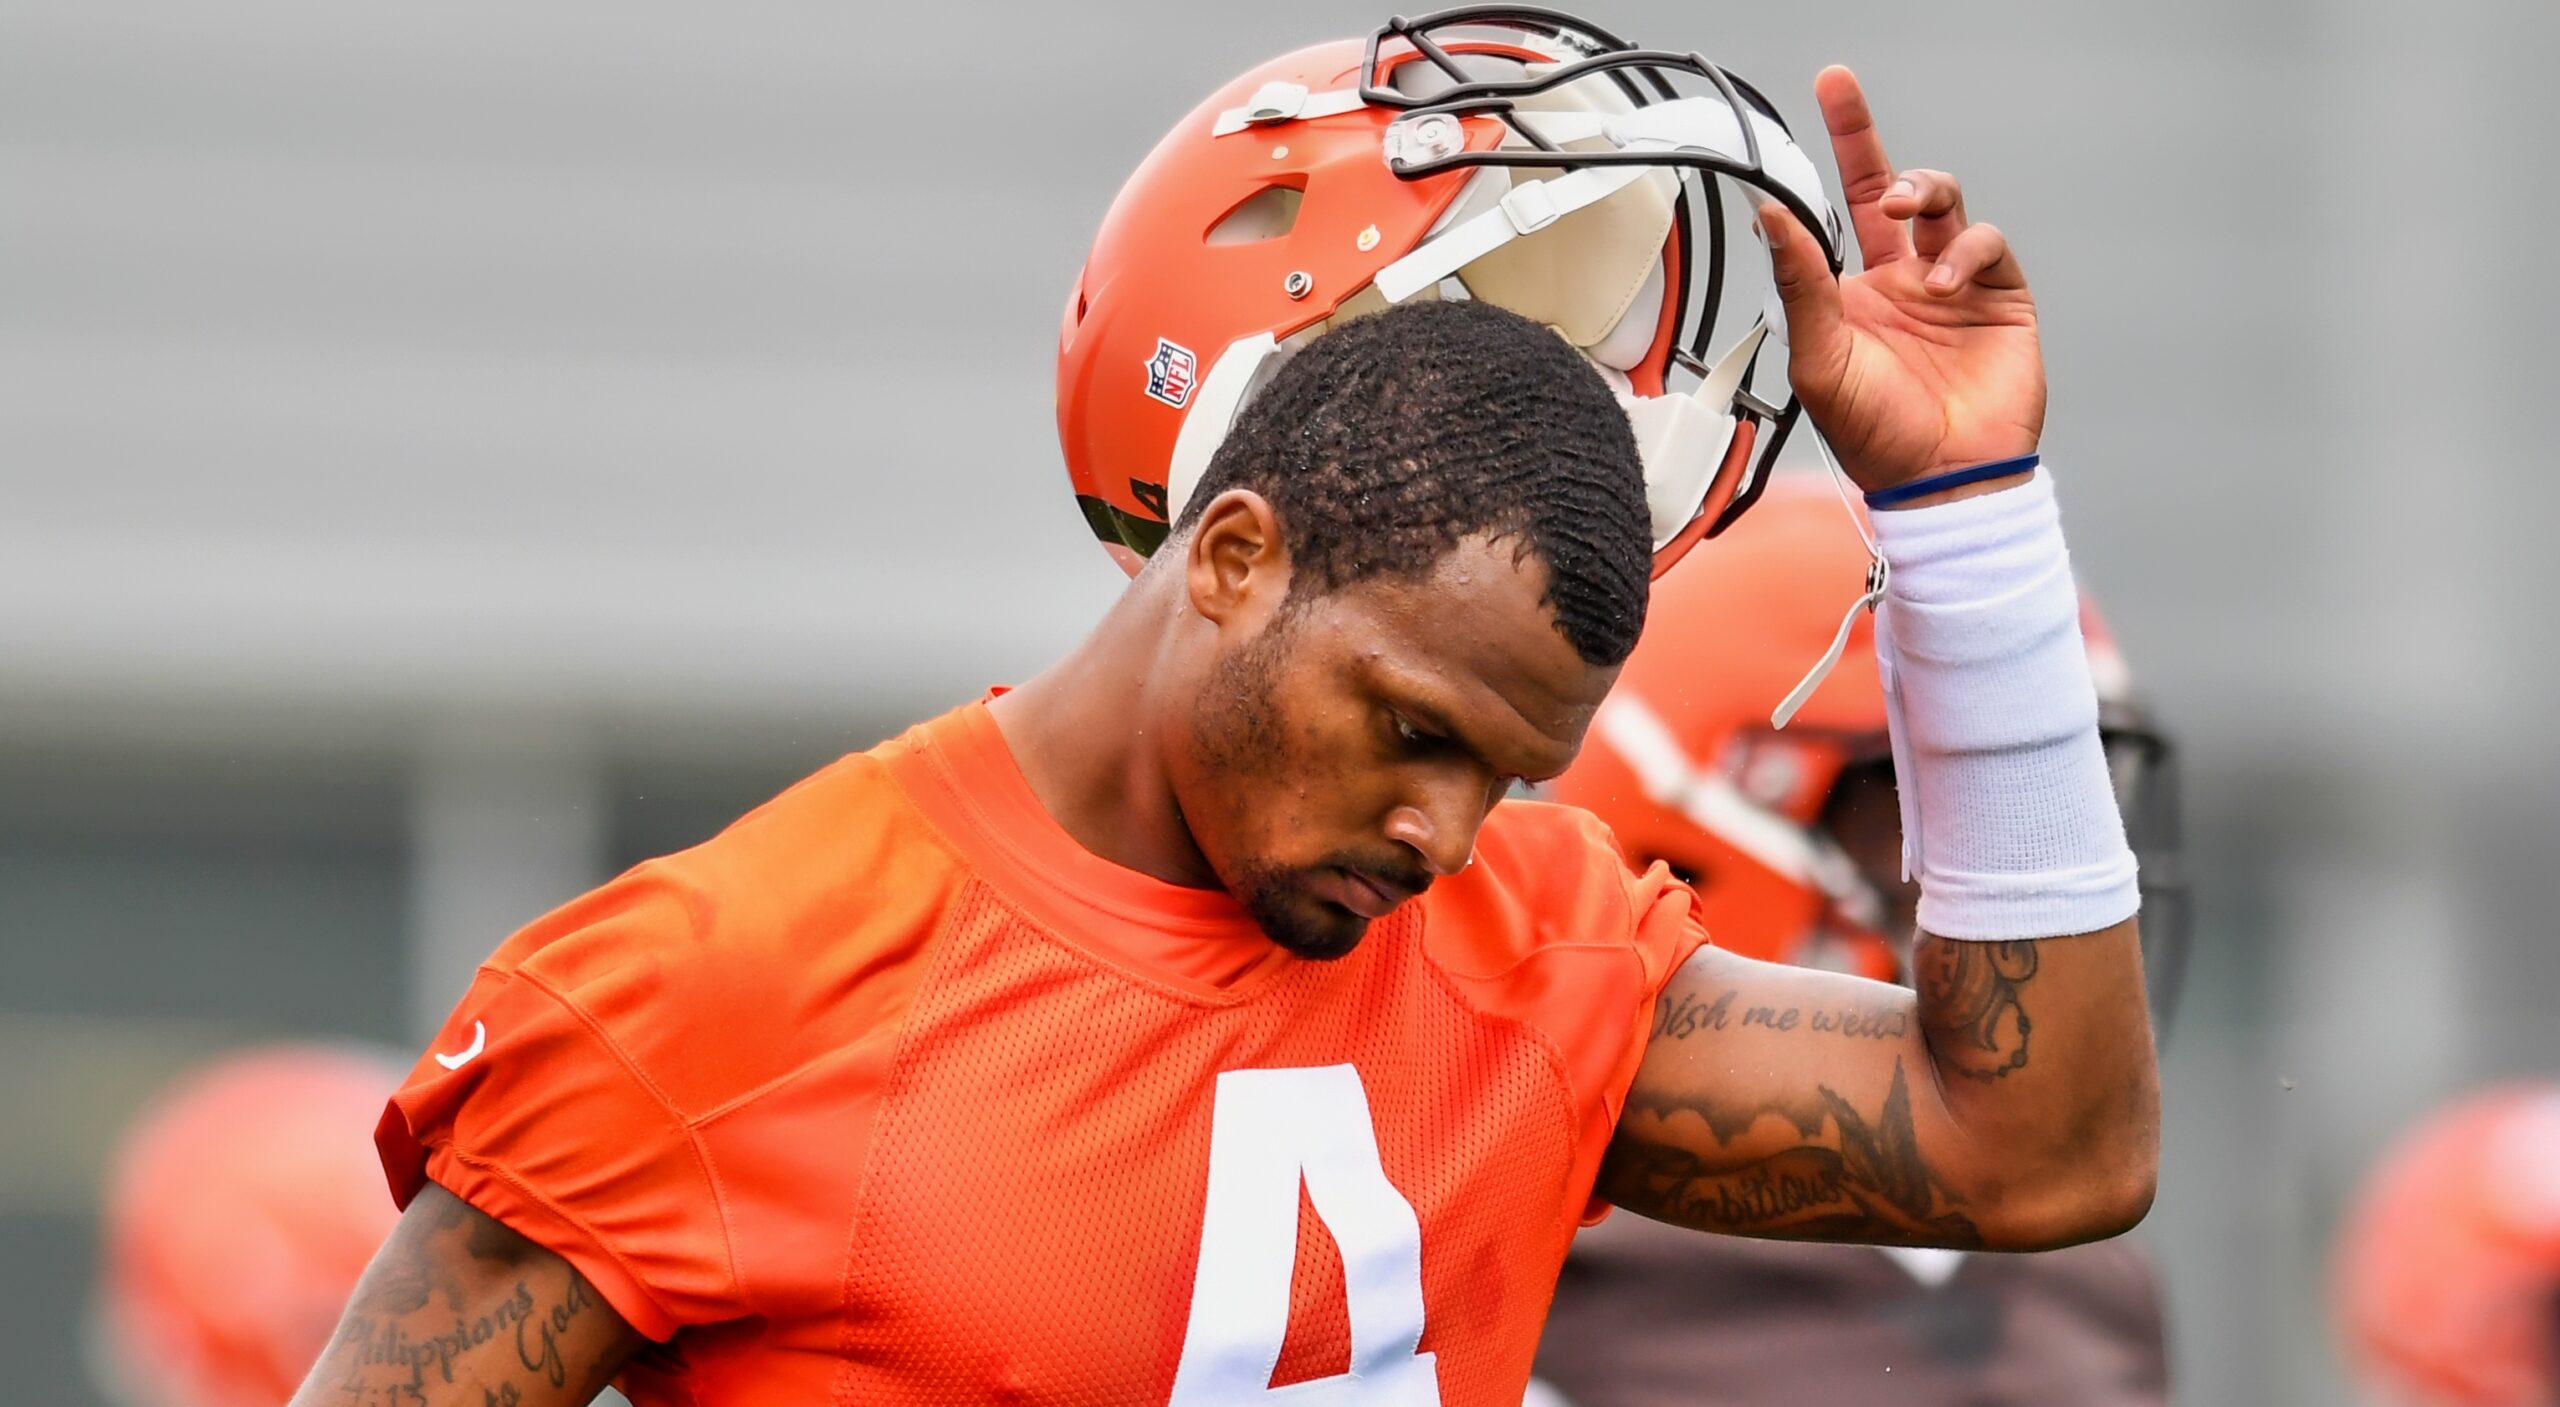 REPORT: Browns Players "Trashed" United Airlines Plane